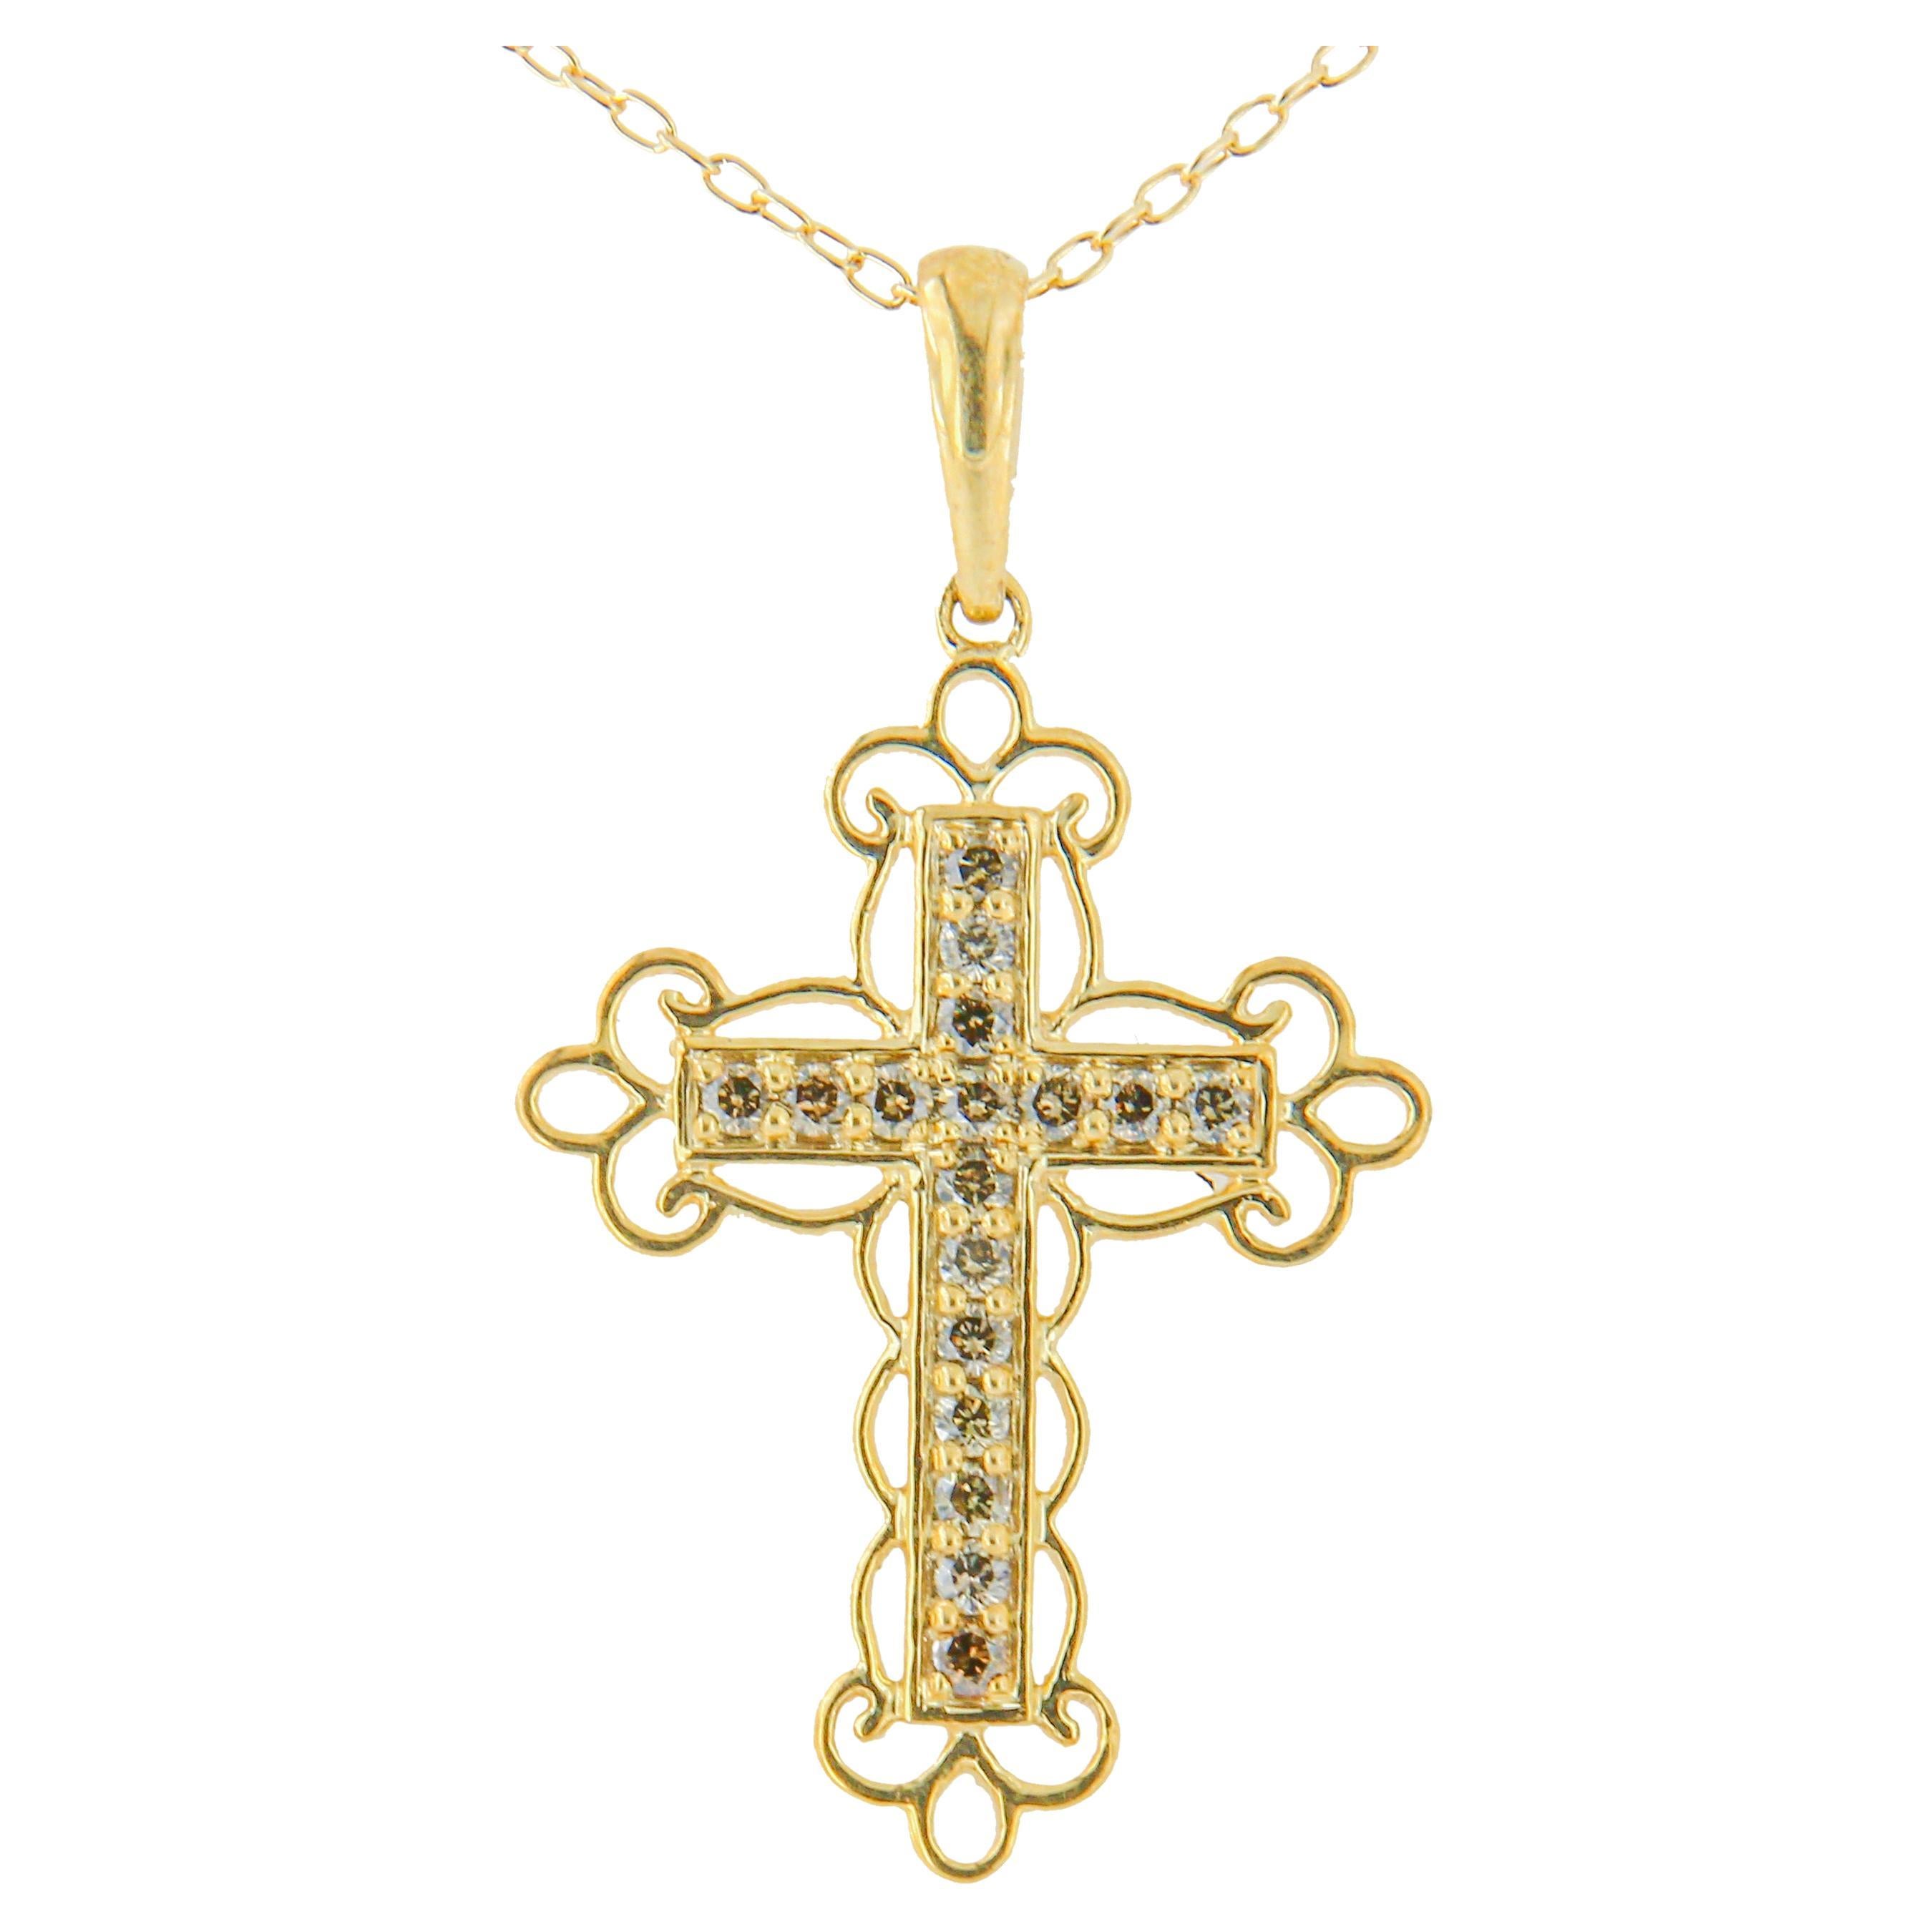 10K Yellow Over Sterling Silver 1/4 Ct Champagne Diamond Cross Pendant Necklace